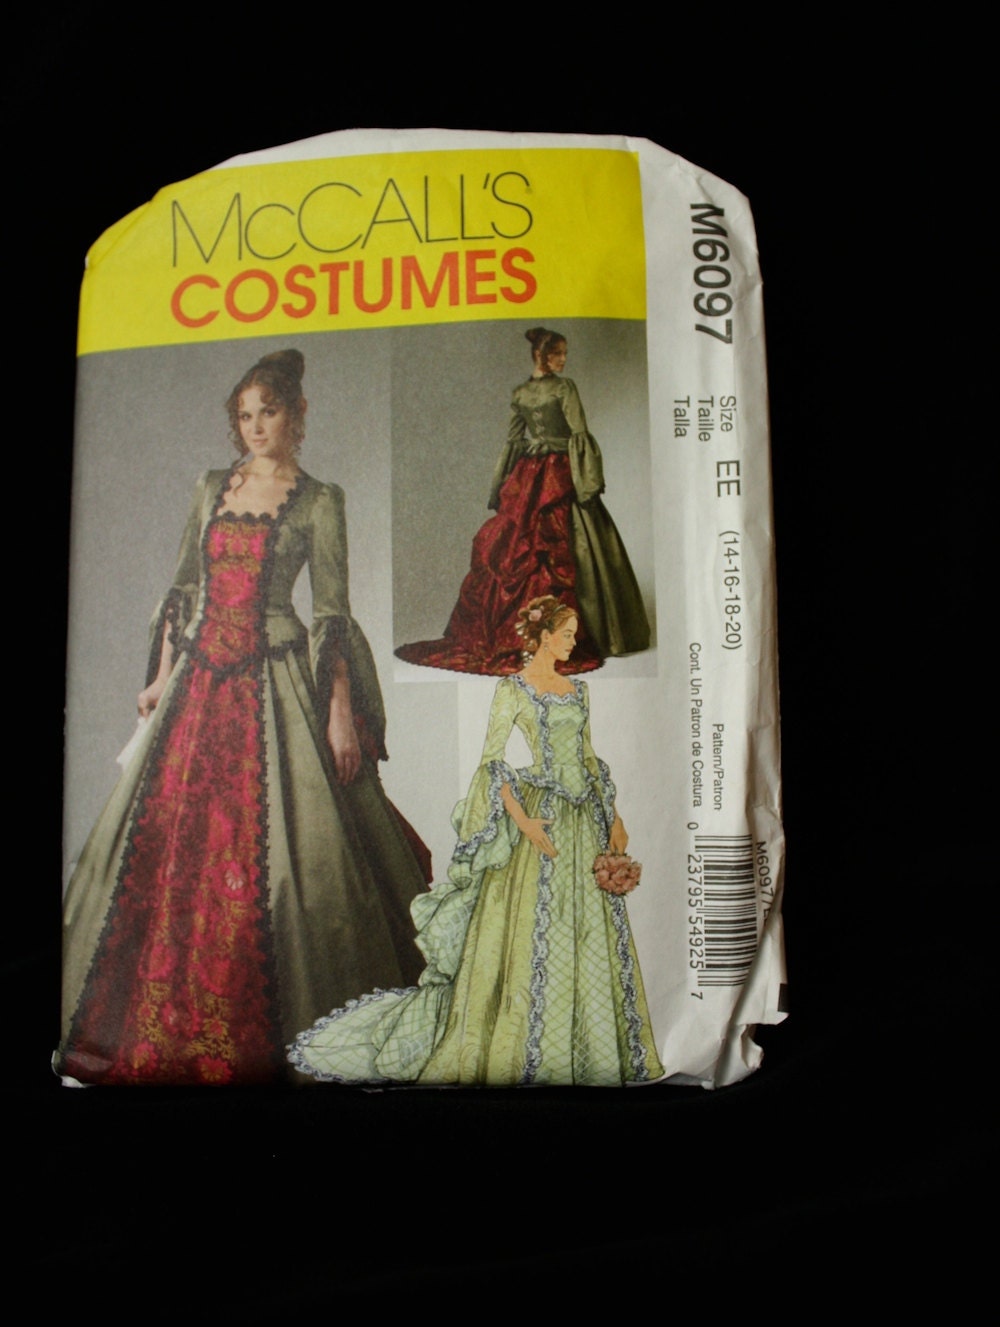 McCall's Costumes Dress PatternVictorian Steampunk | Etsy